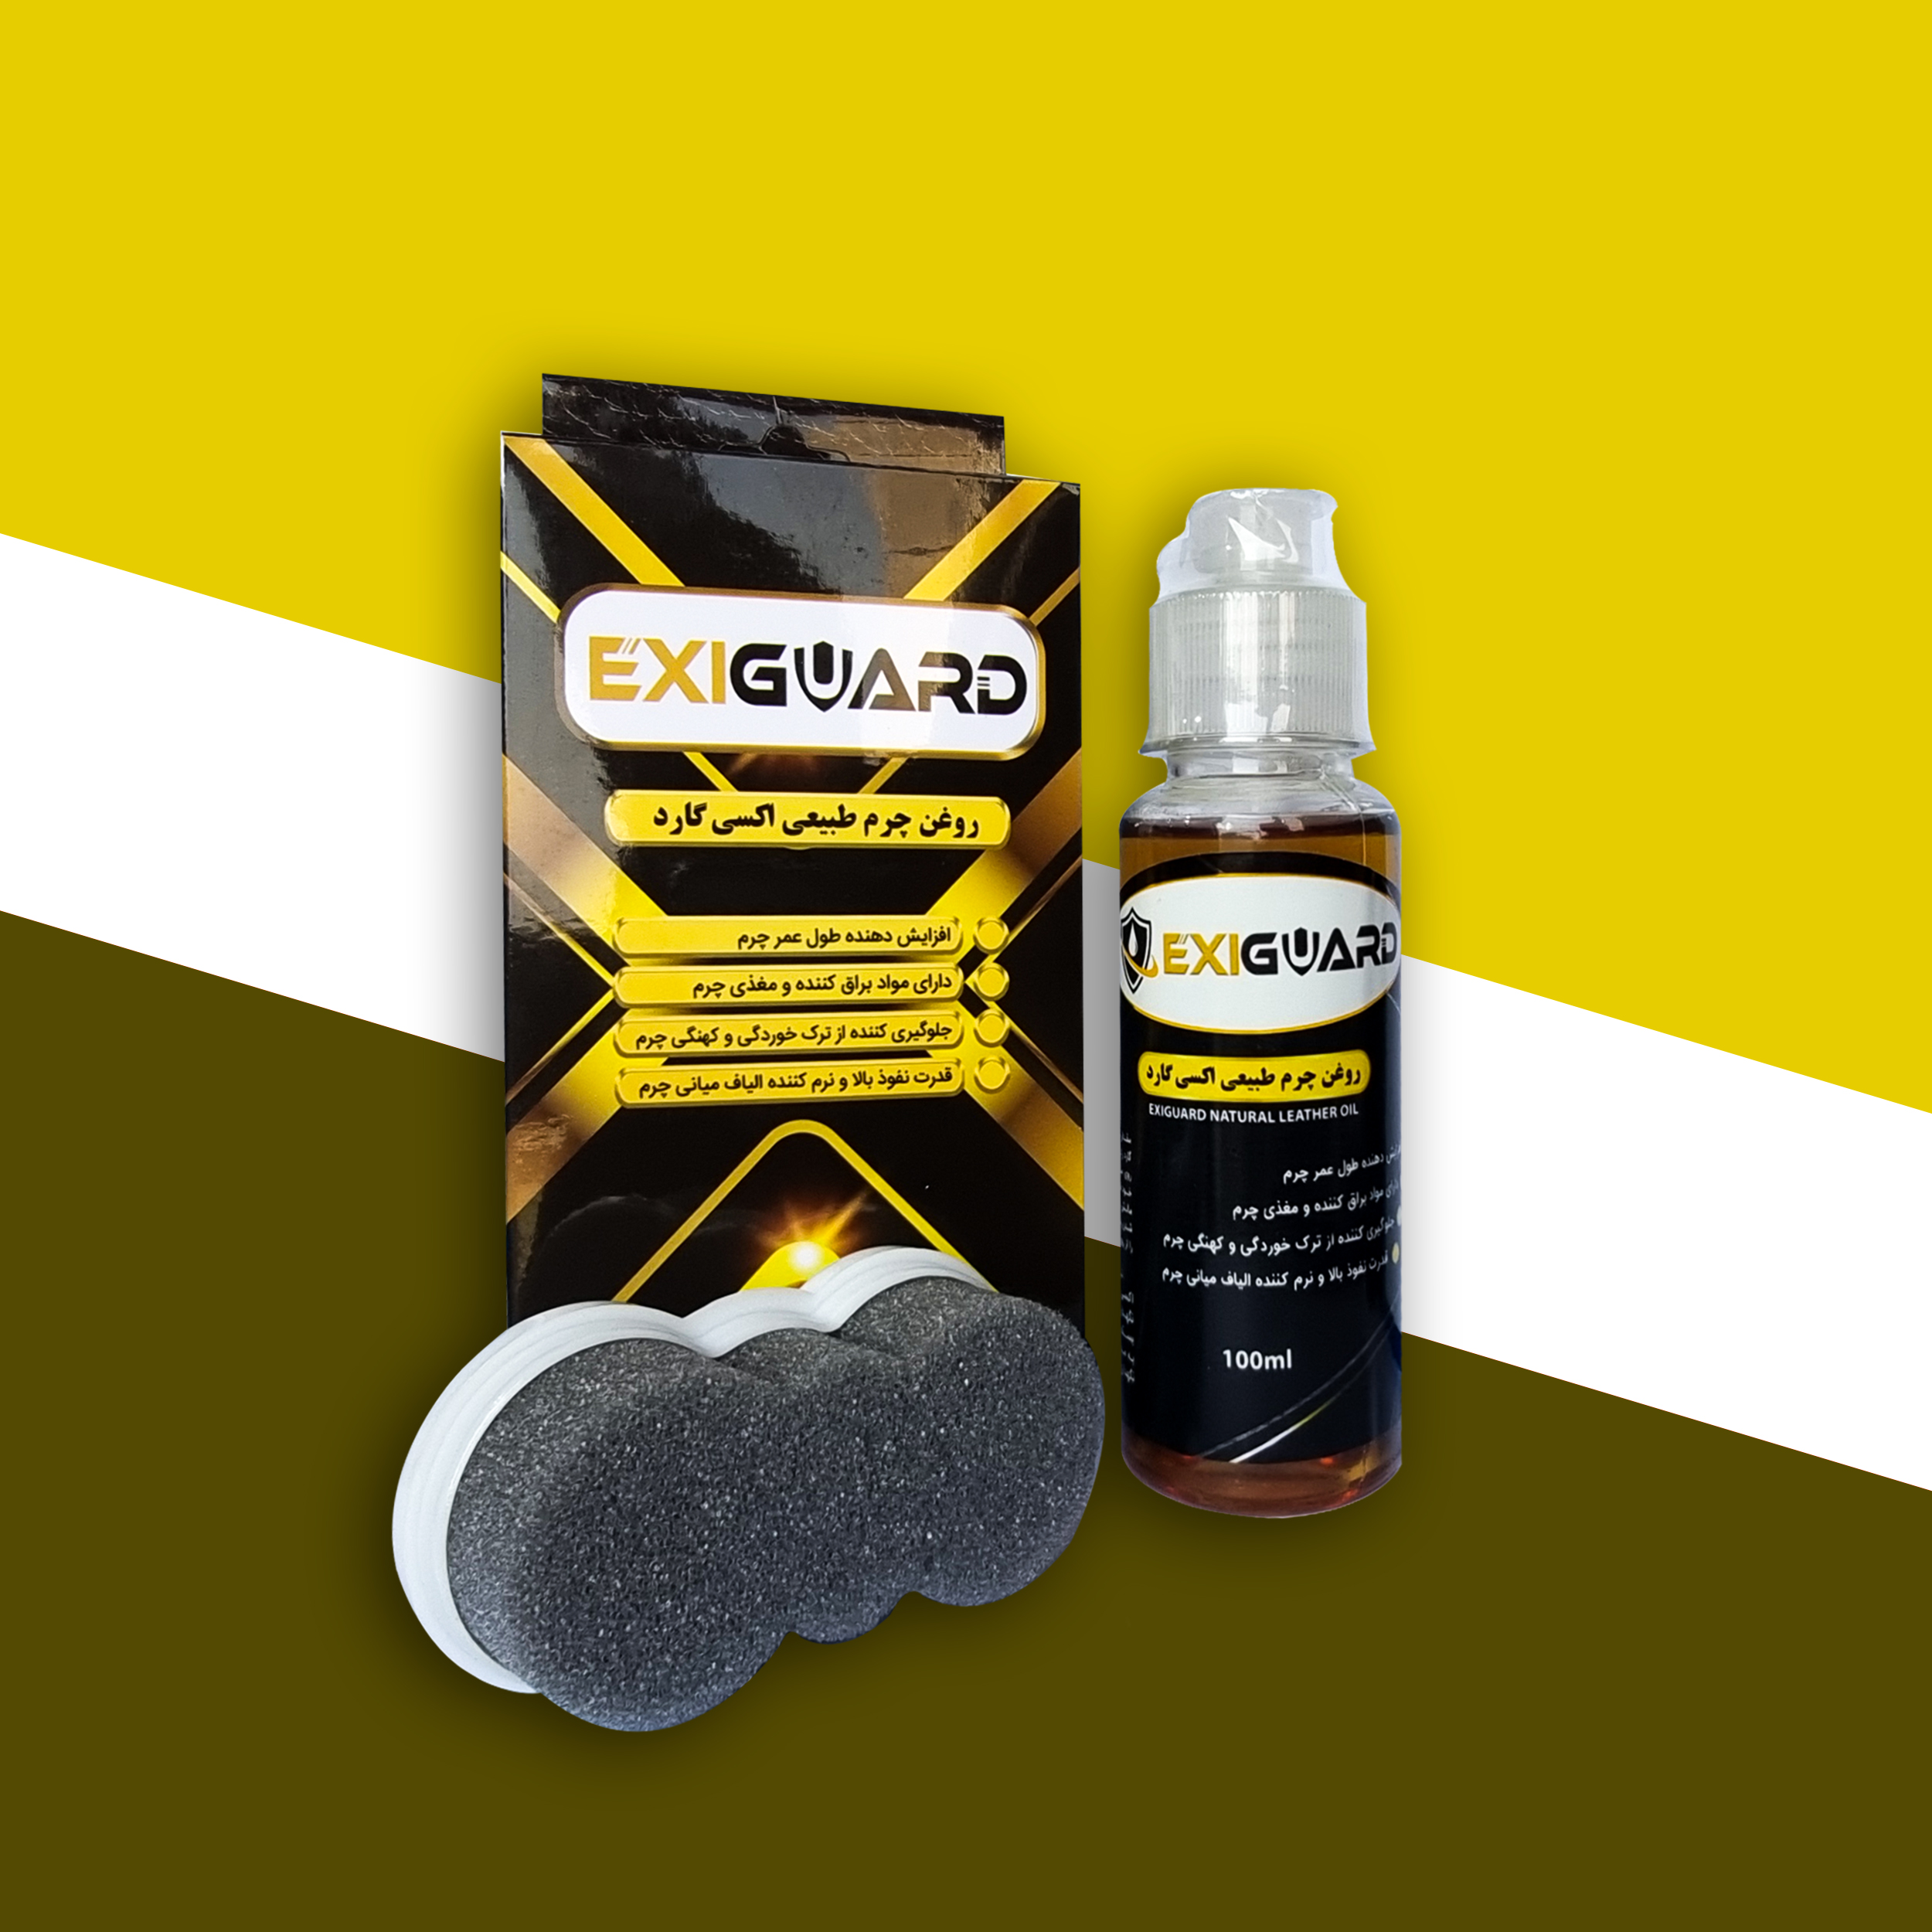 Exiguard Leather Softening (Natural)